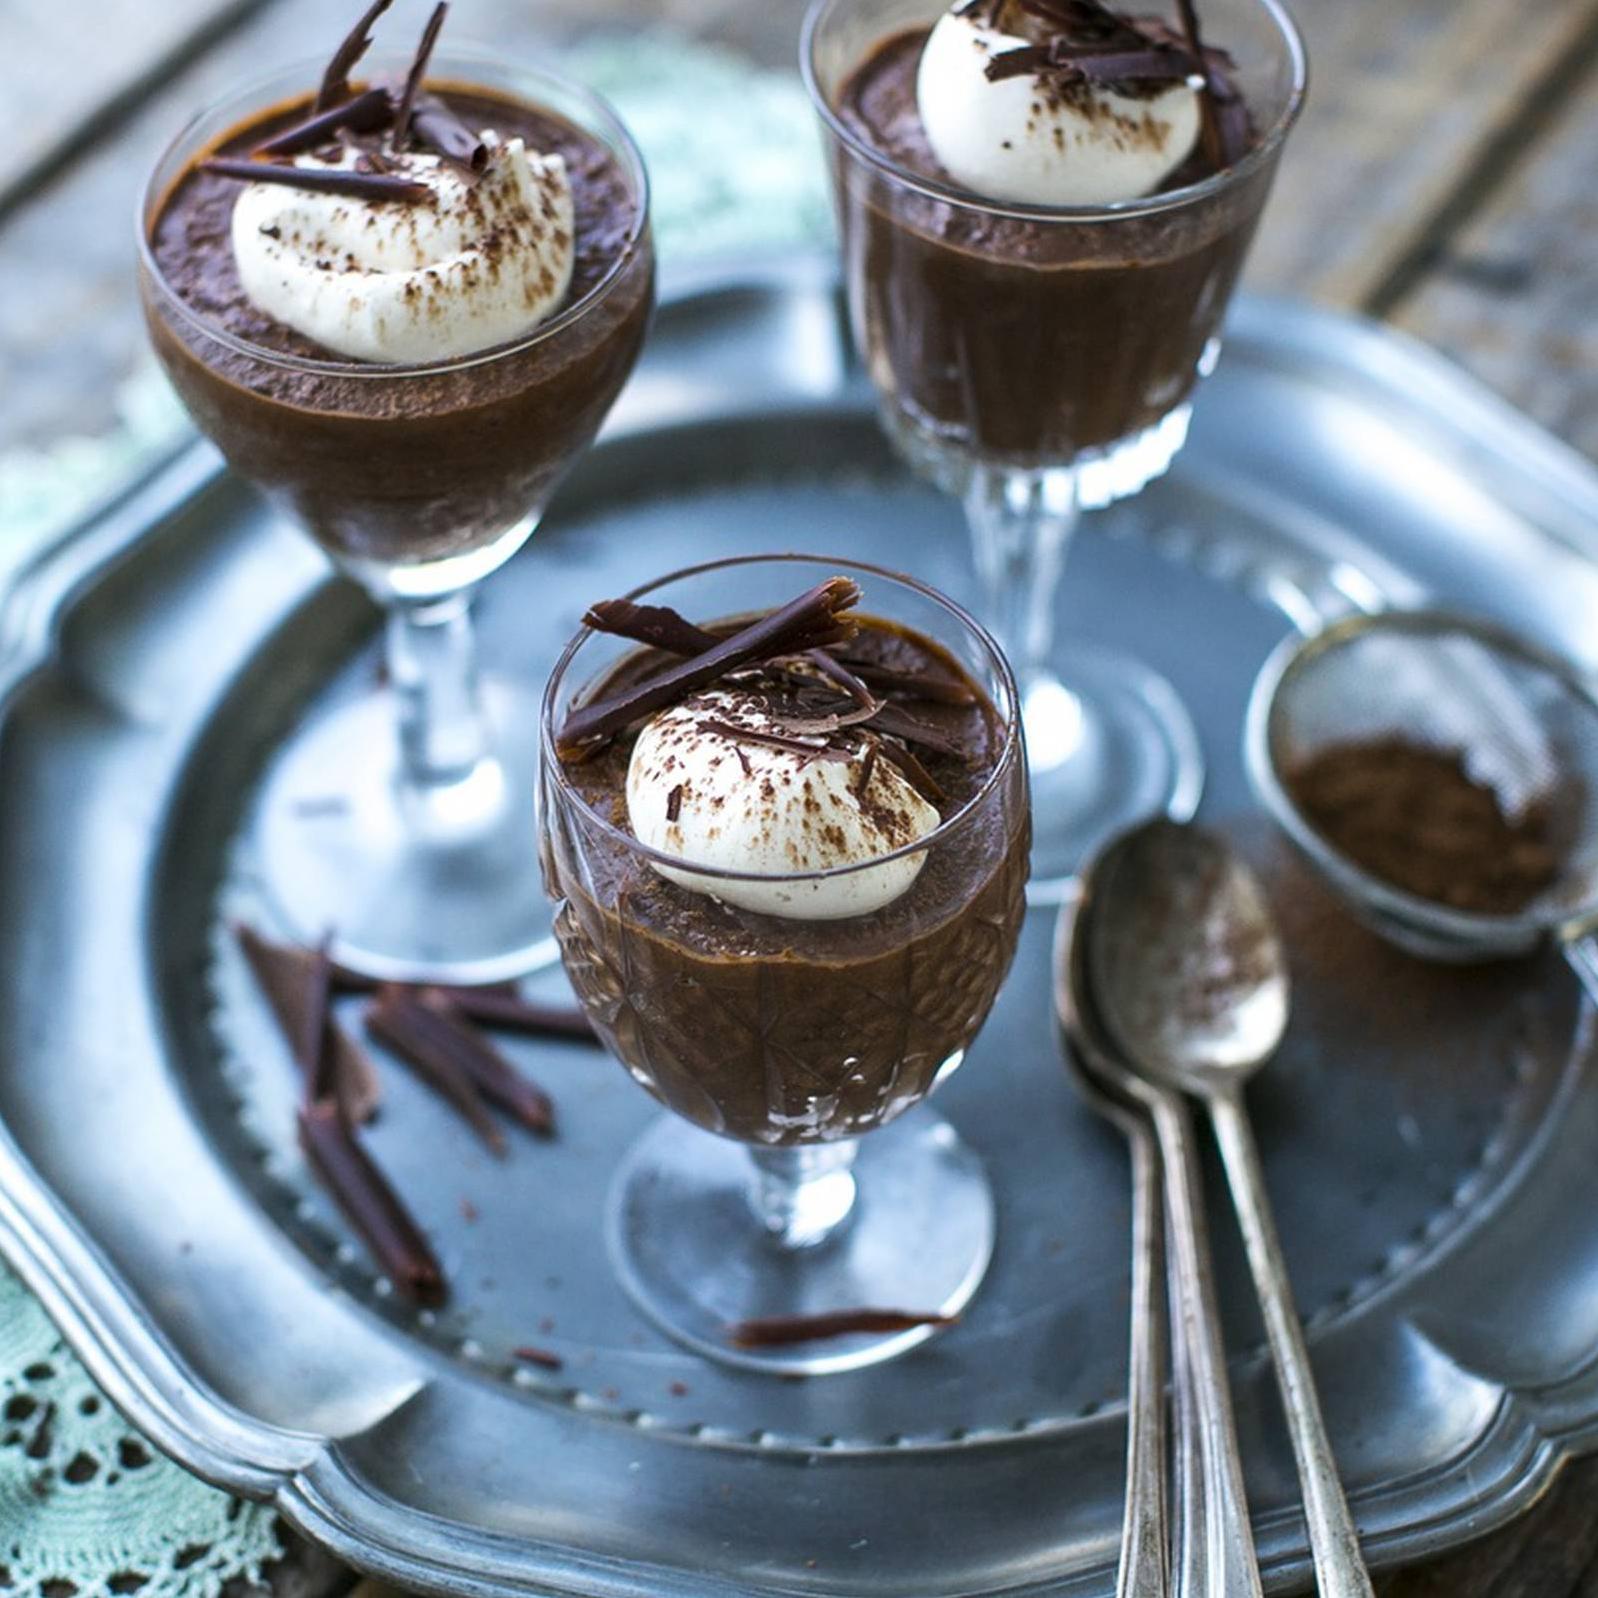  This mousse tastes as heavenly as it looks.